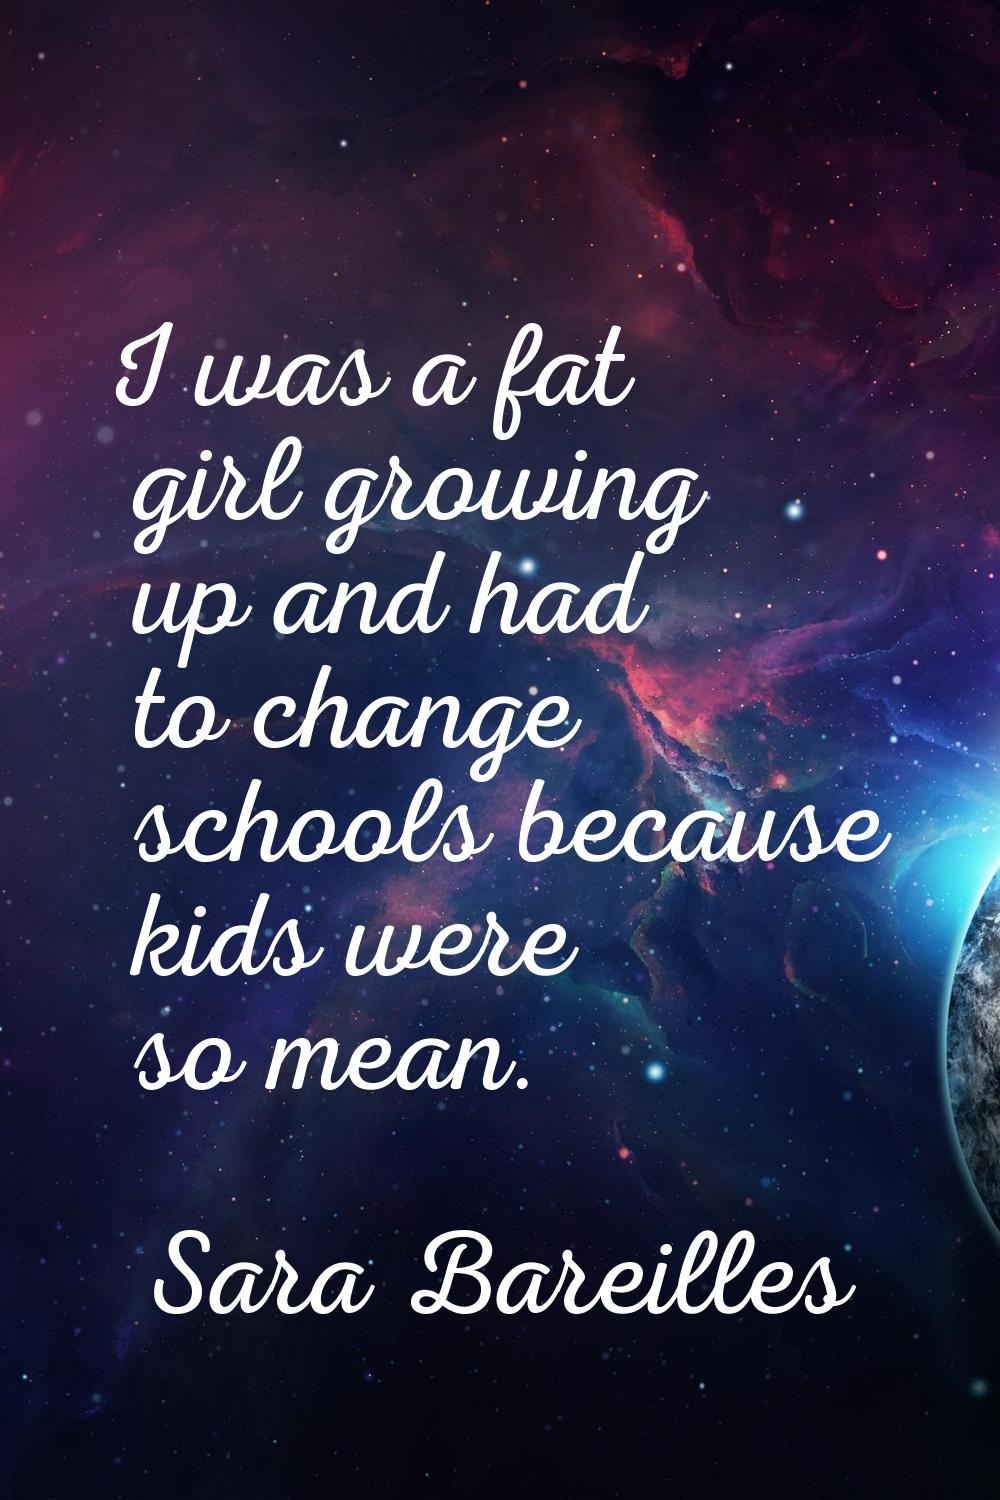 I was a fat girl growing up and had to change schools because kids were so mean.